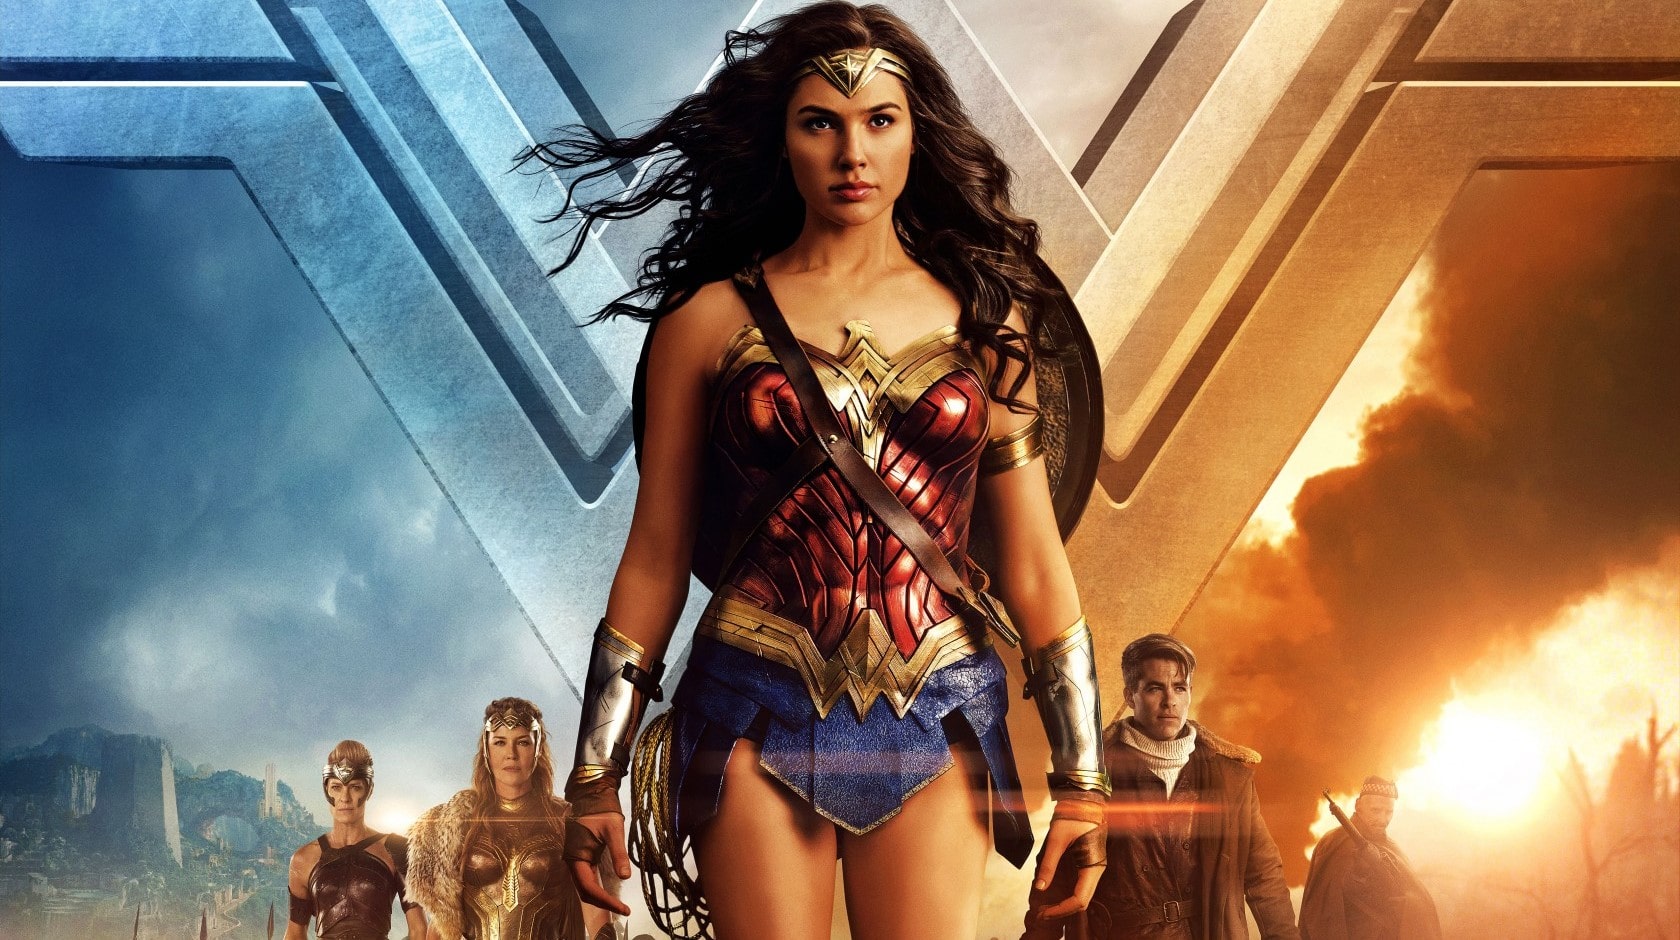 This Wonder Woman Cosplayer Looks ‘EXACTLY’ Like ‘Gal Gadot’